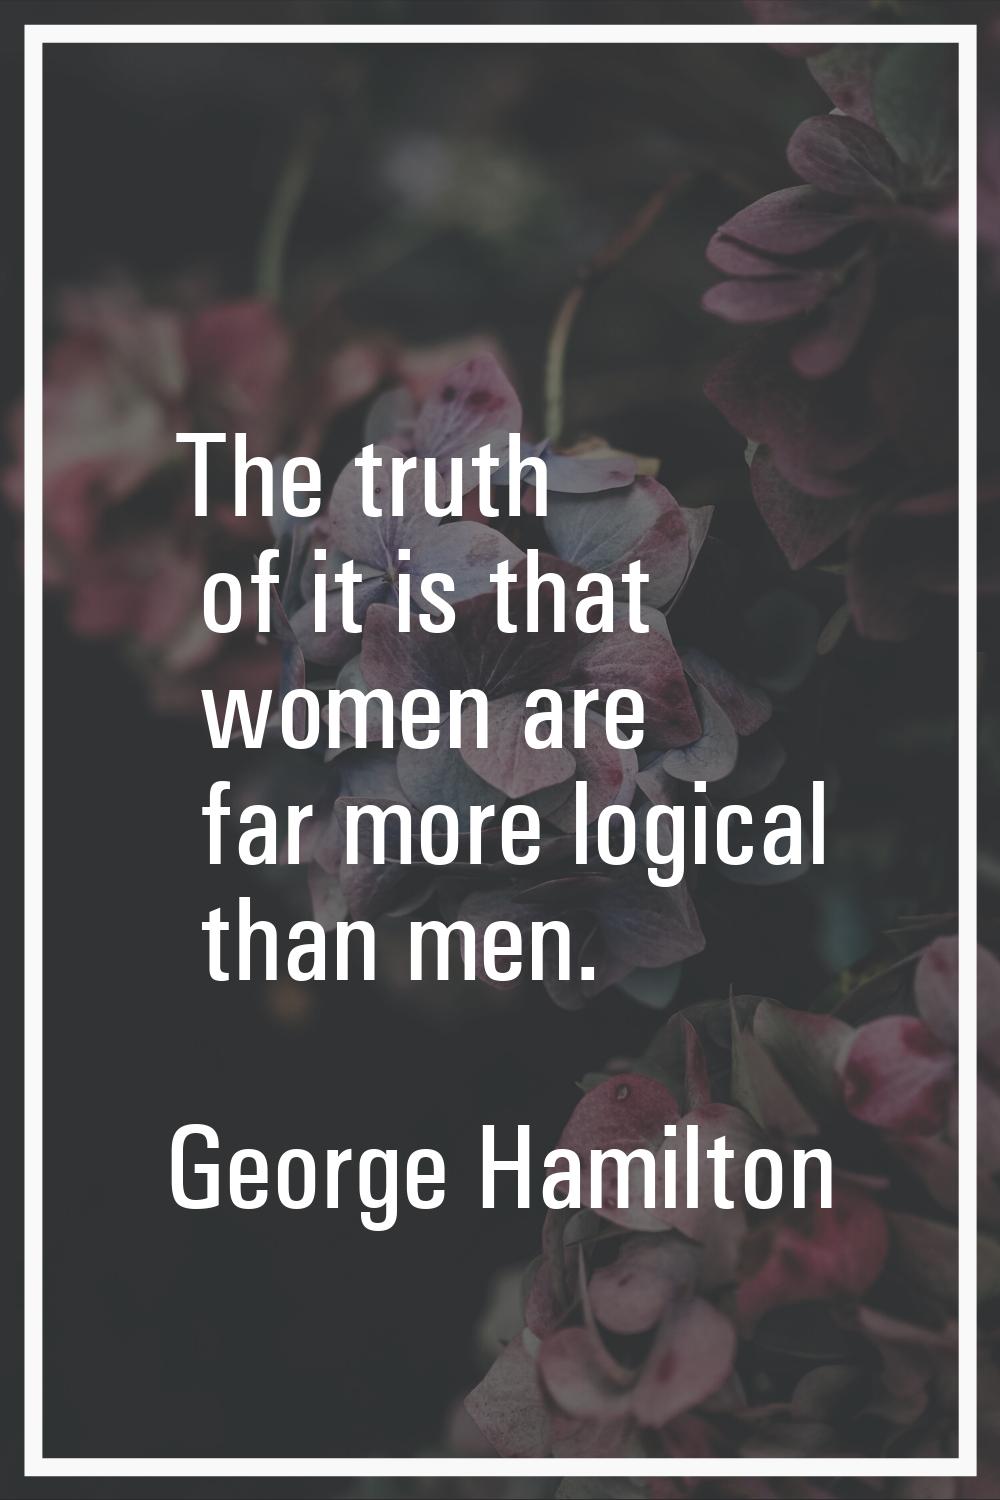 The truth of it is that women are far more logical than men.